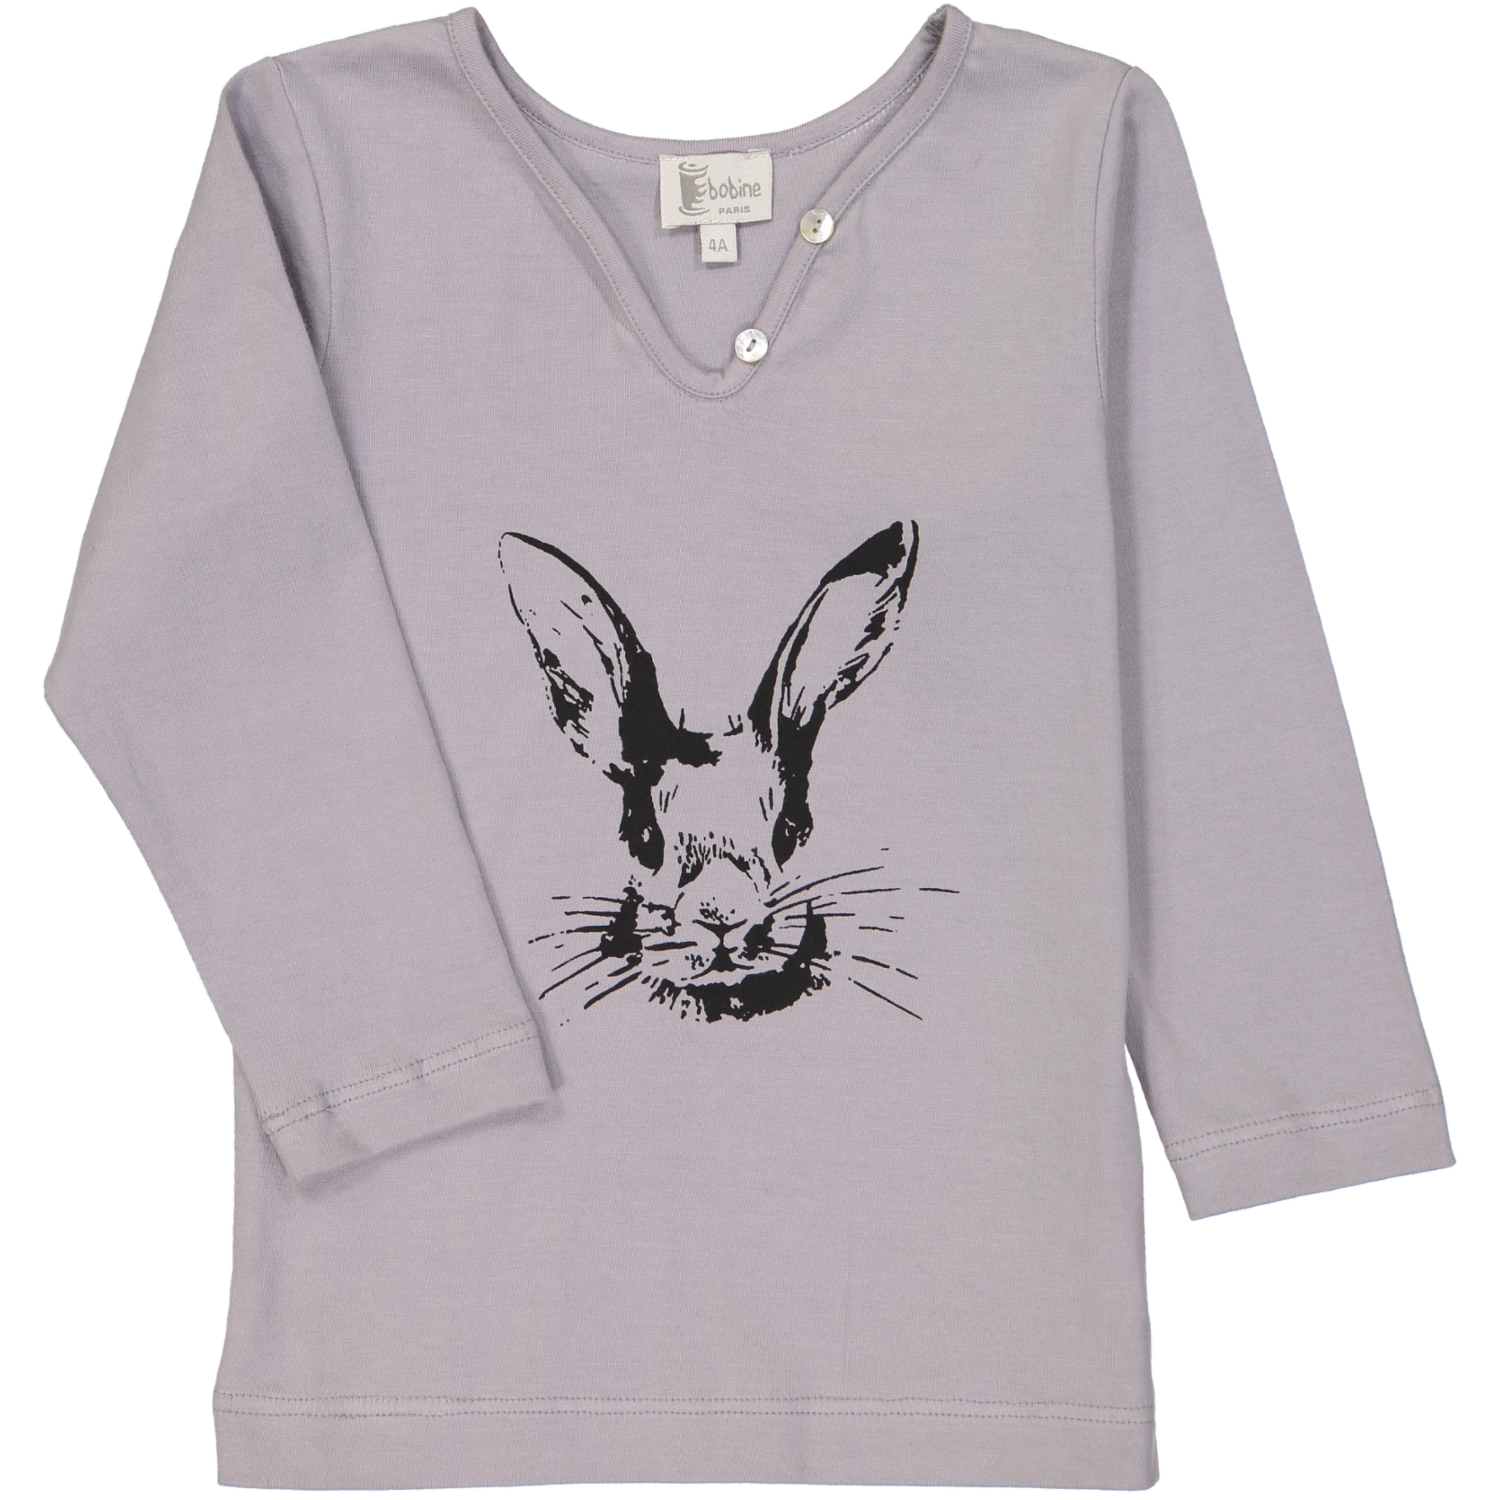 TS lapin easter gris_1500x1500